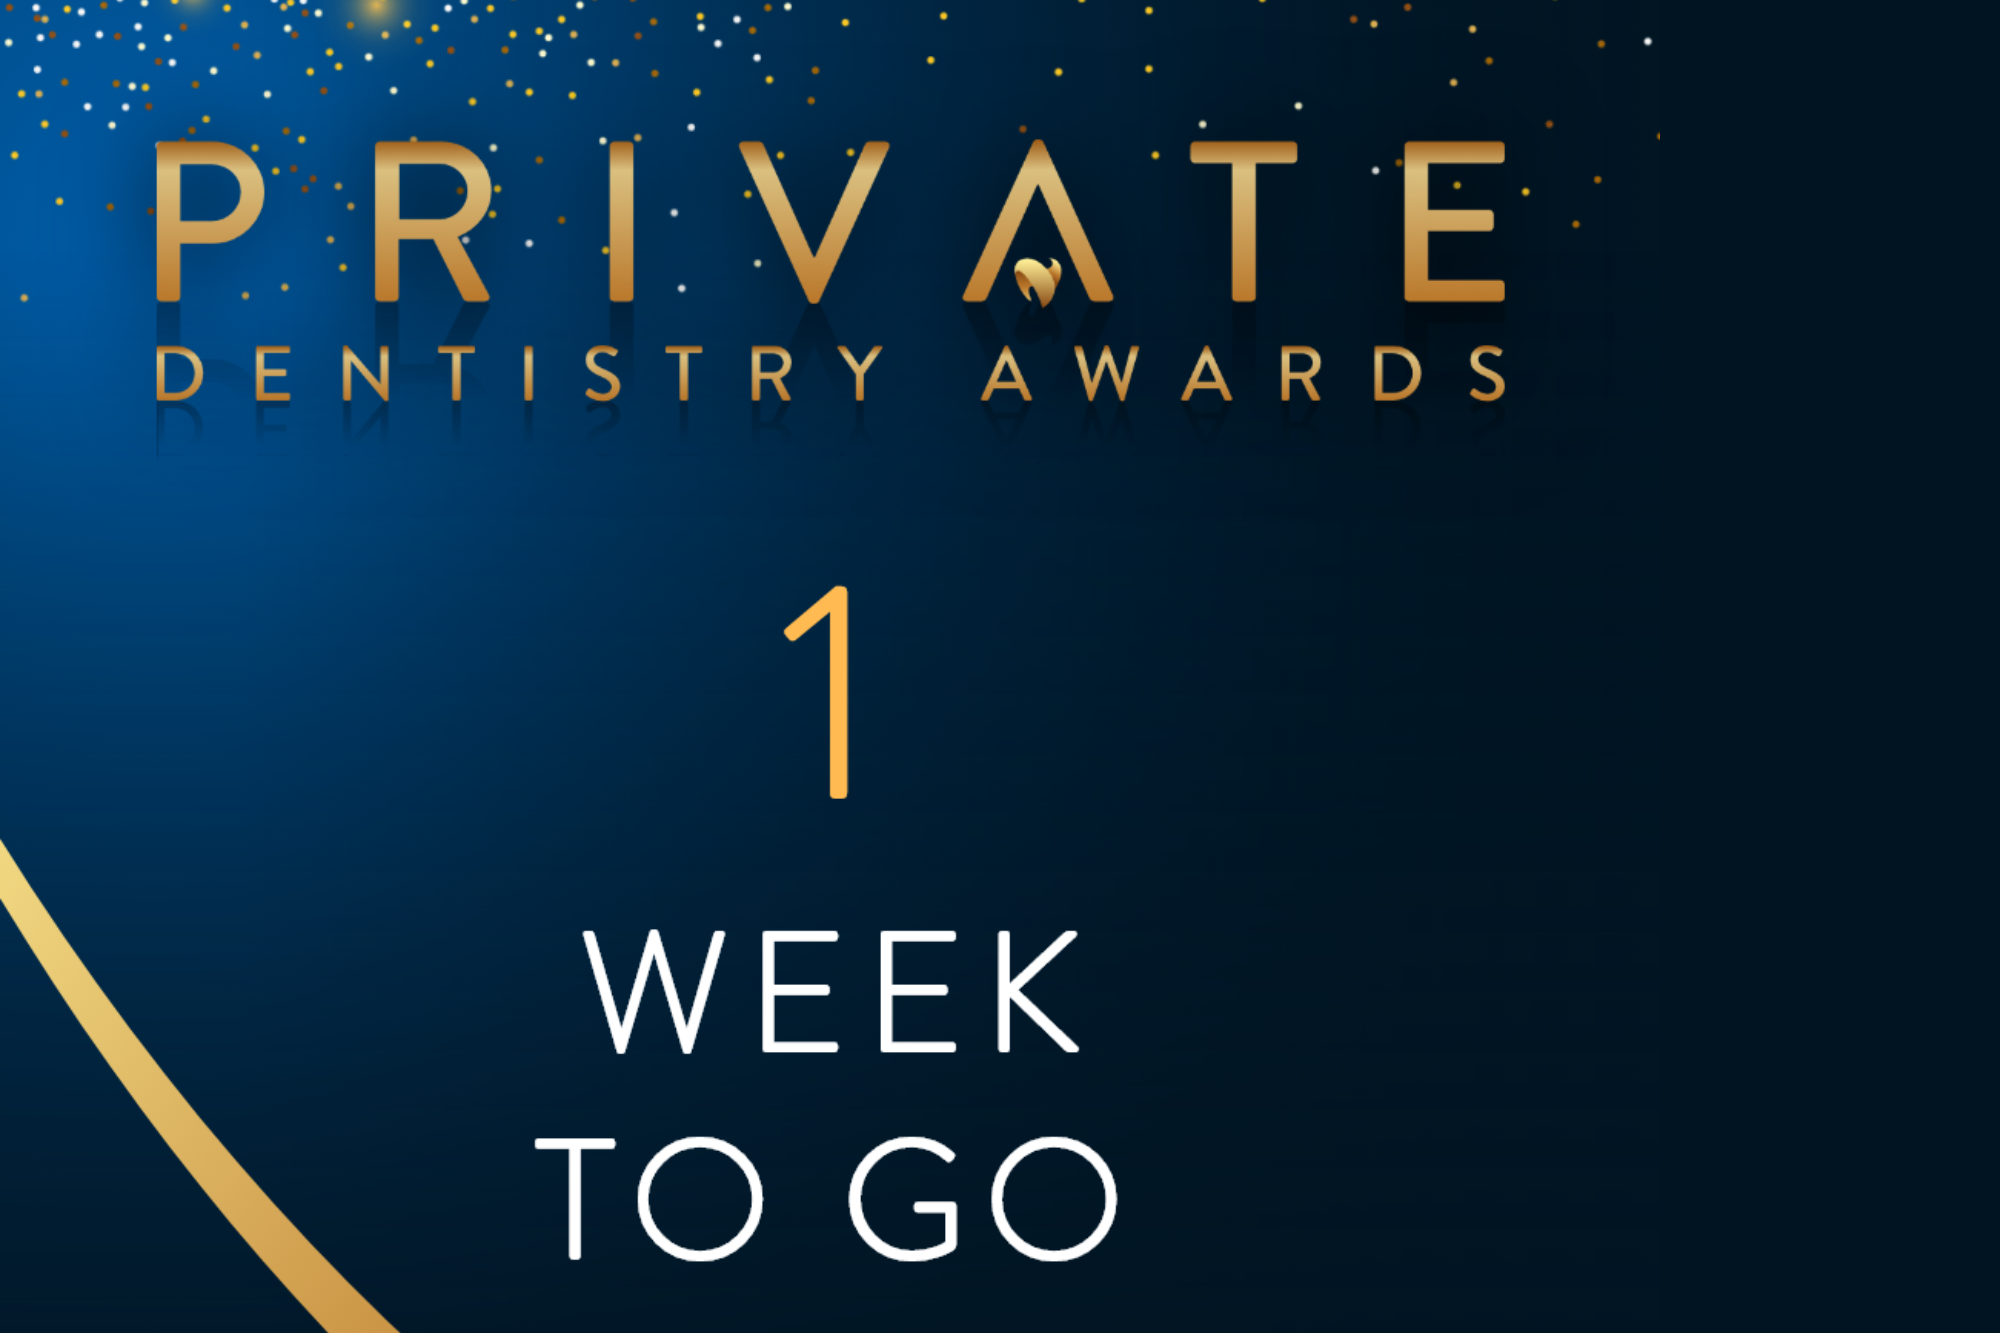 There's one week to go until the entry deadline for Private Dentistry Awards. Don't miss out on one of the biggest dental events of the year – get your entry in now!